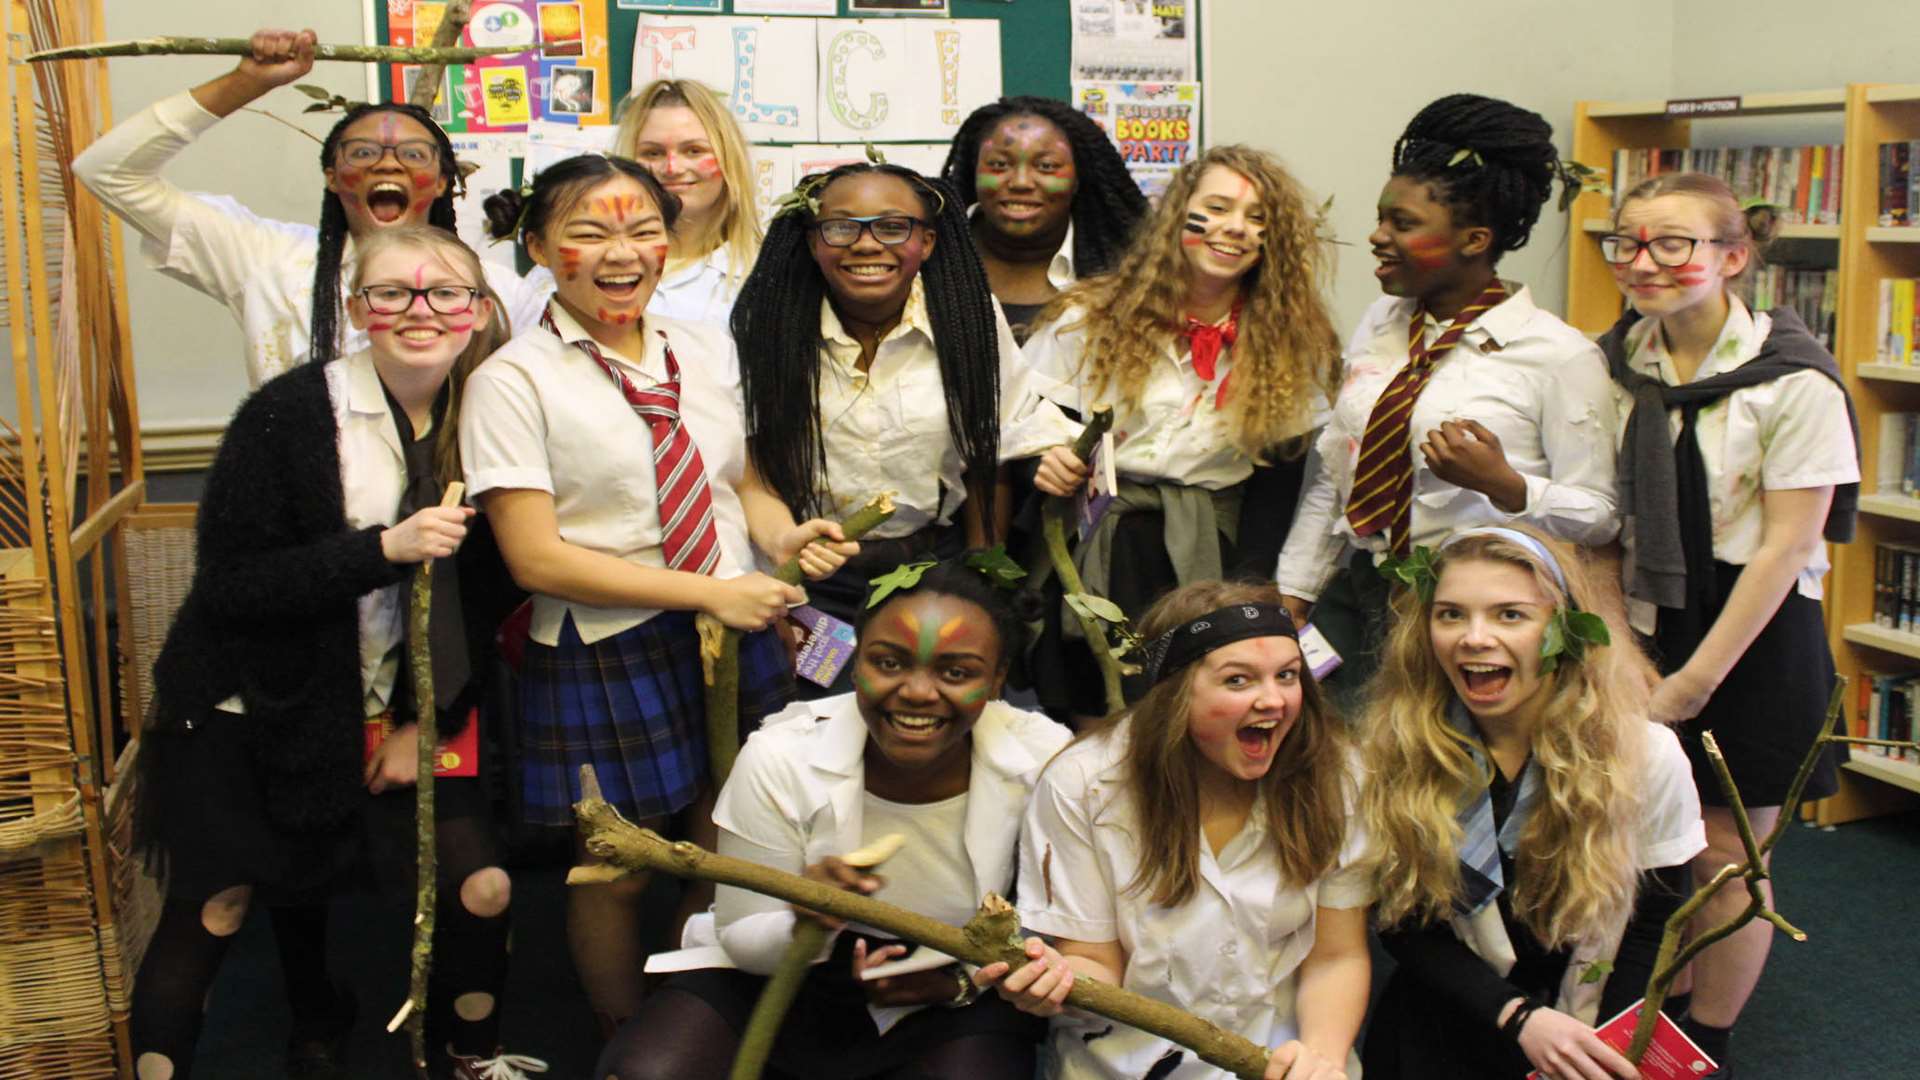 Cobham Hall girls studied Lord of the Flies